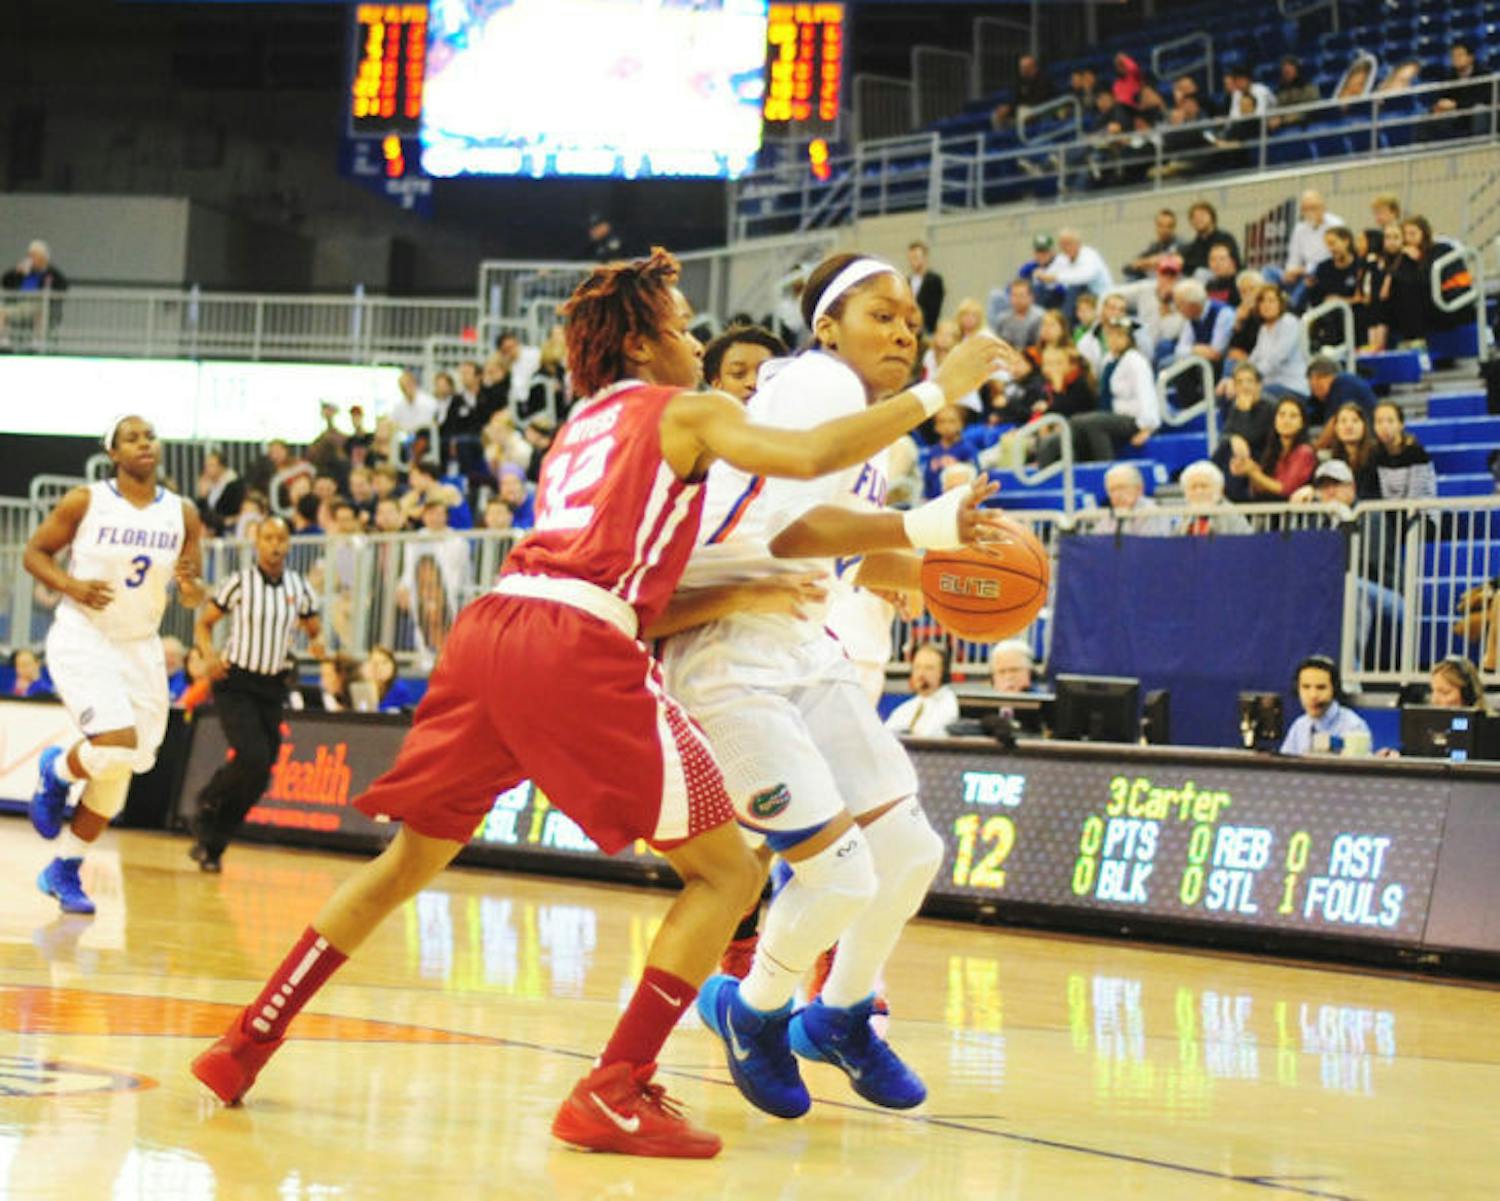 Antoinette Bannister drives toward the net during Florida’s 75-67 win against Alabama on Thursday in the O’Connell Center. Bannister scored 18 points — a career high — while shooting better than 50 percent from the field against Ole Miss on Sunday.